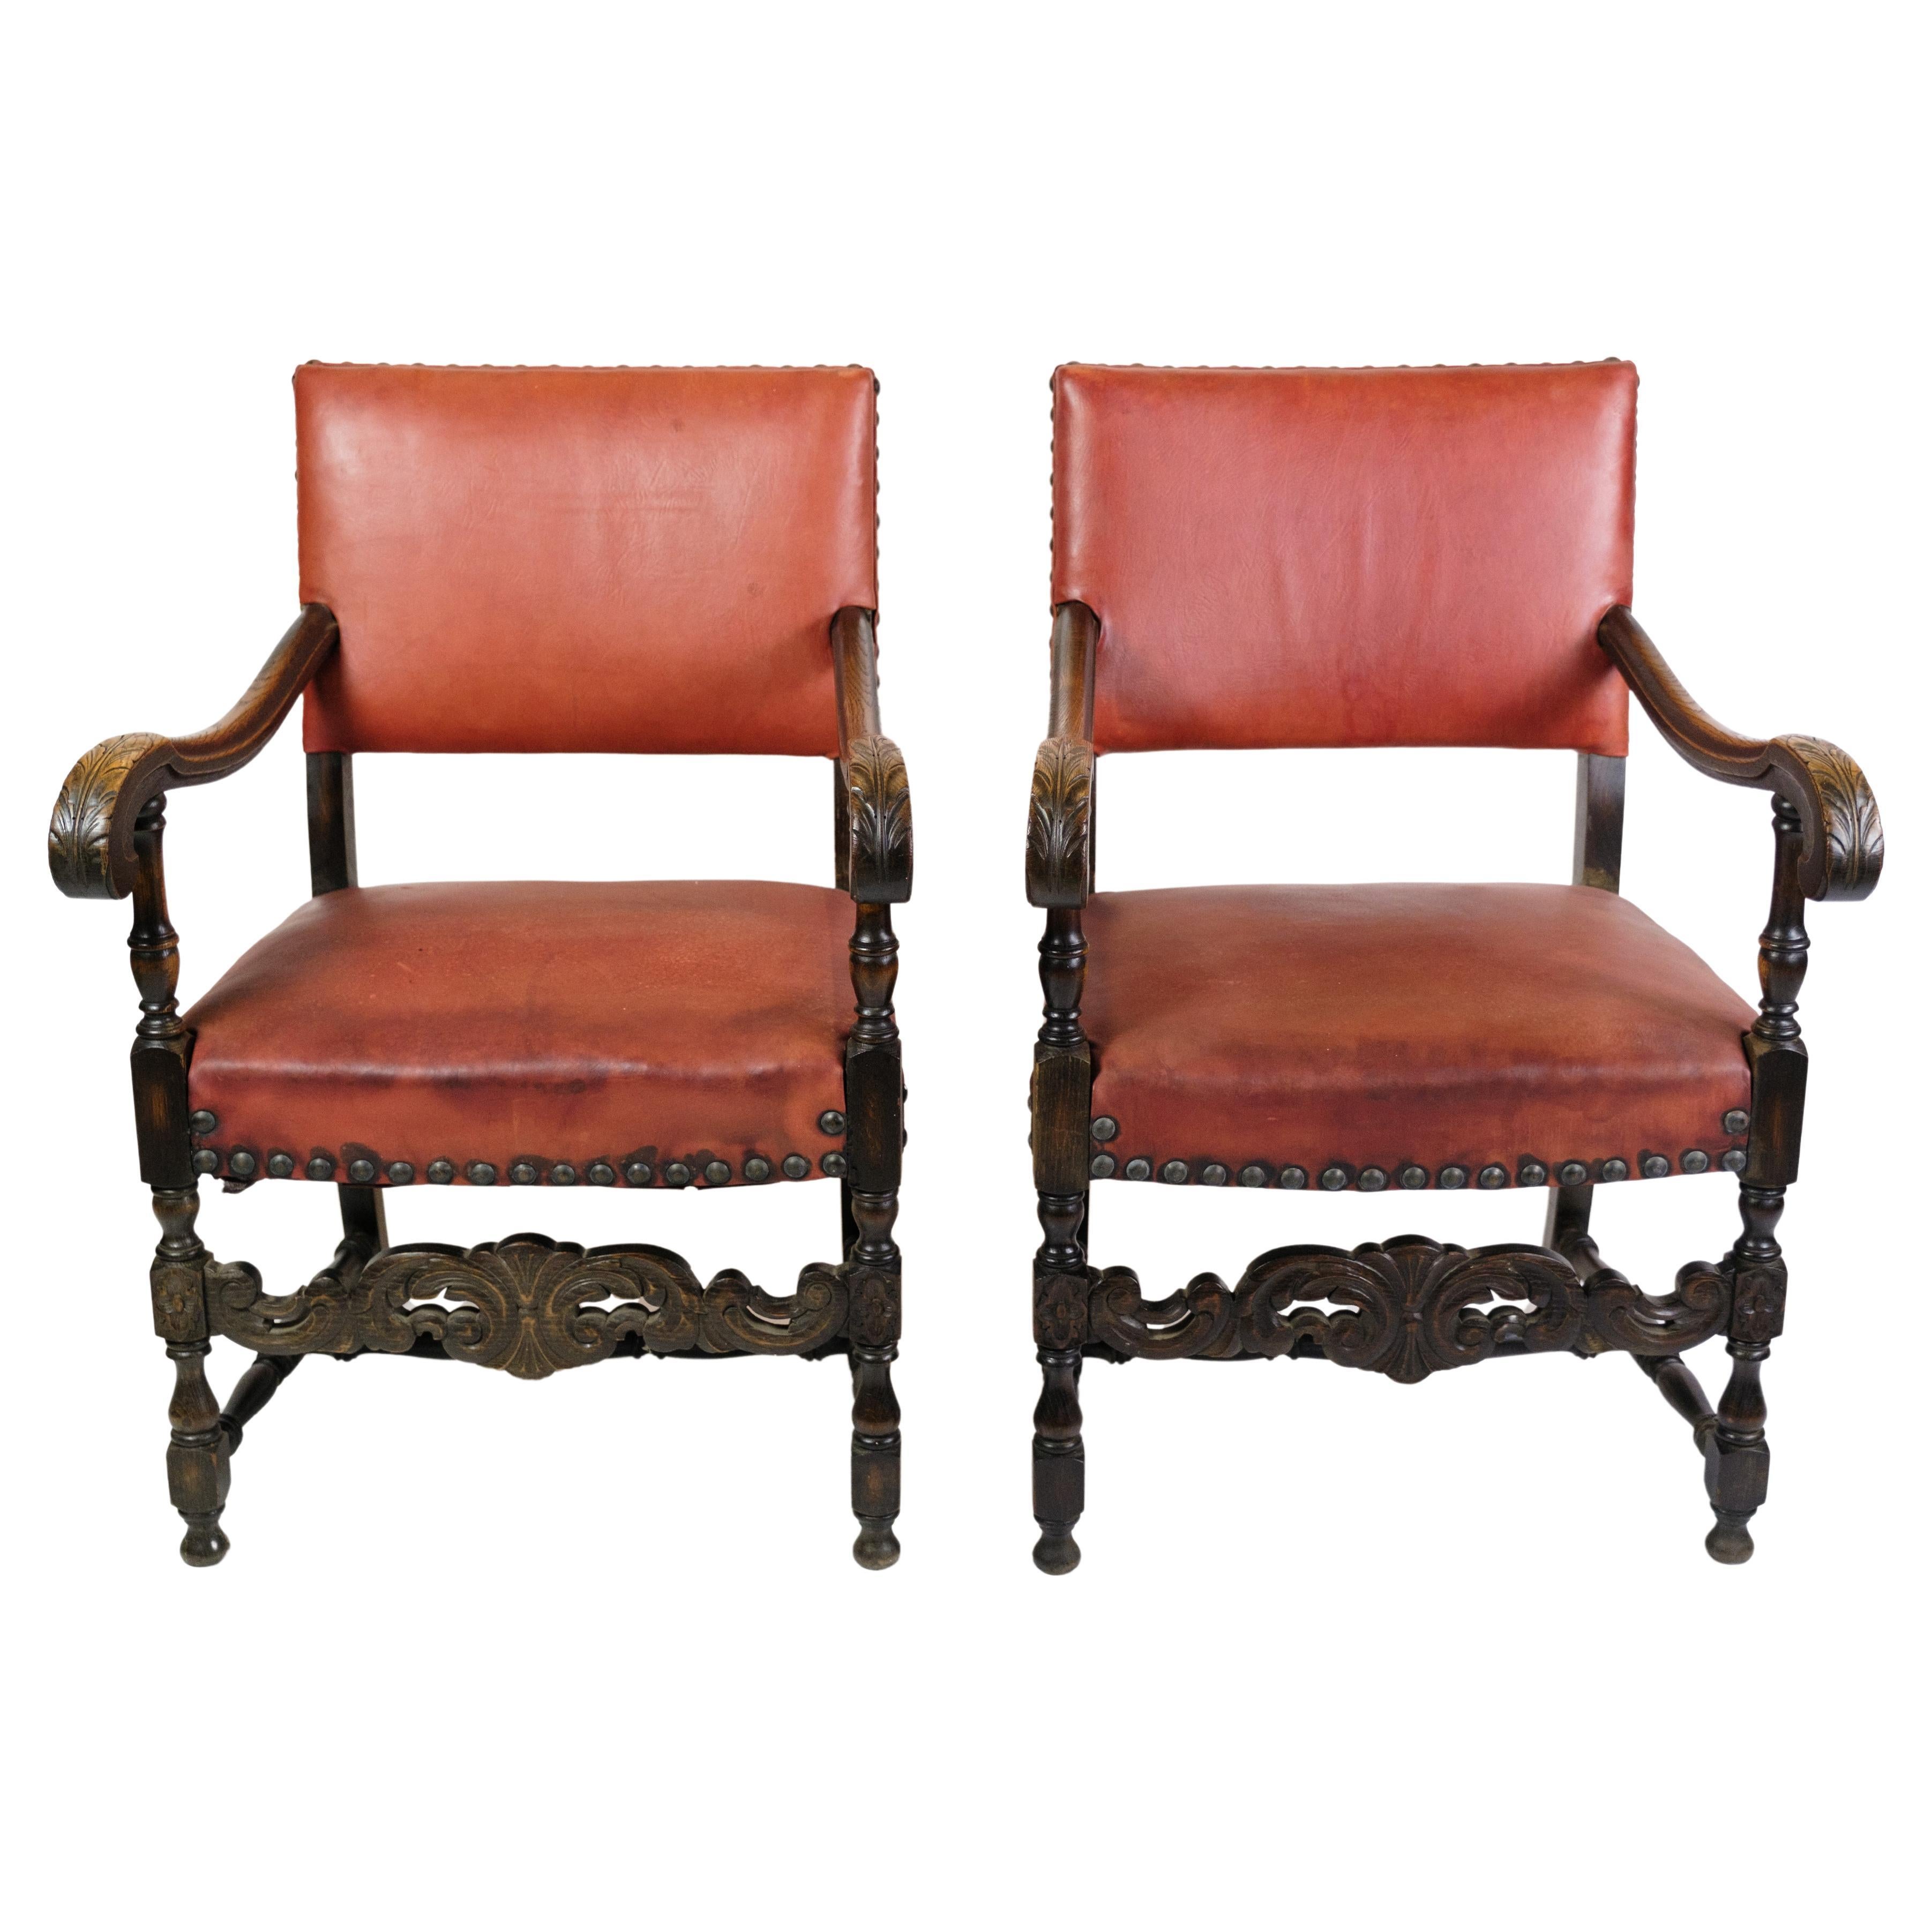 Set Of 2 Antique Armchairs Made In Oak & With Red Leather From 1930s